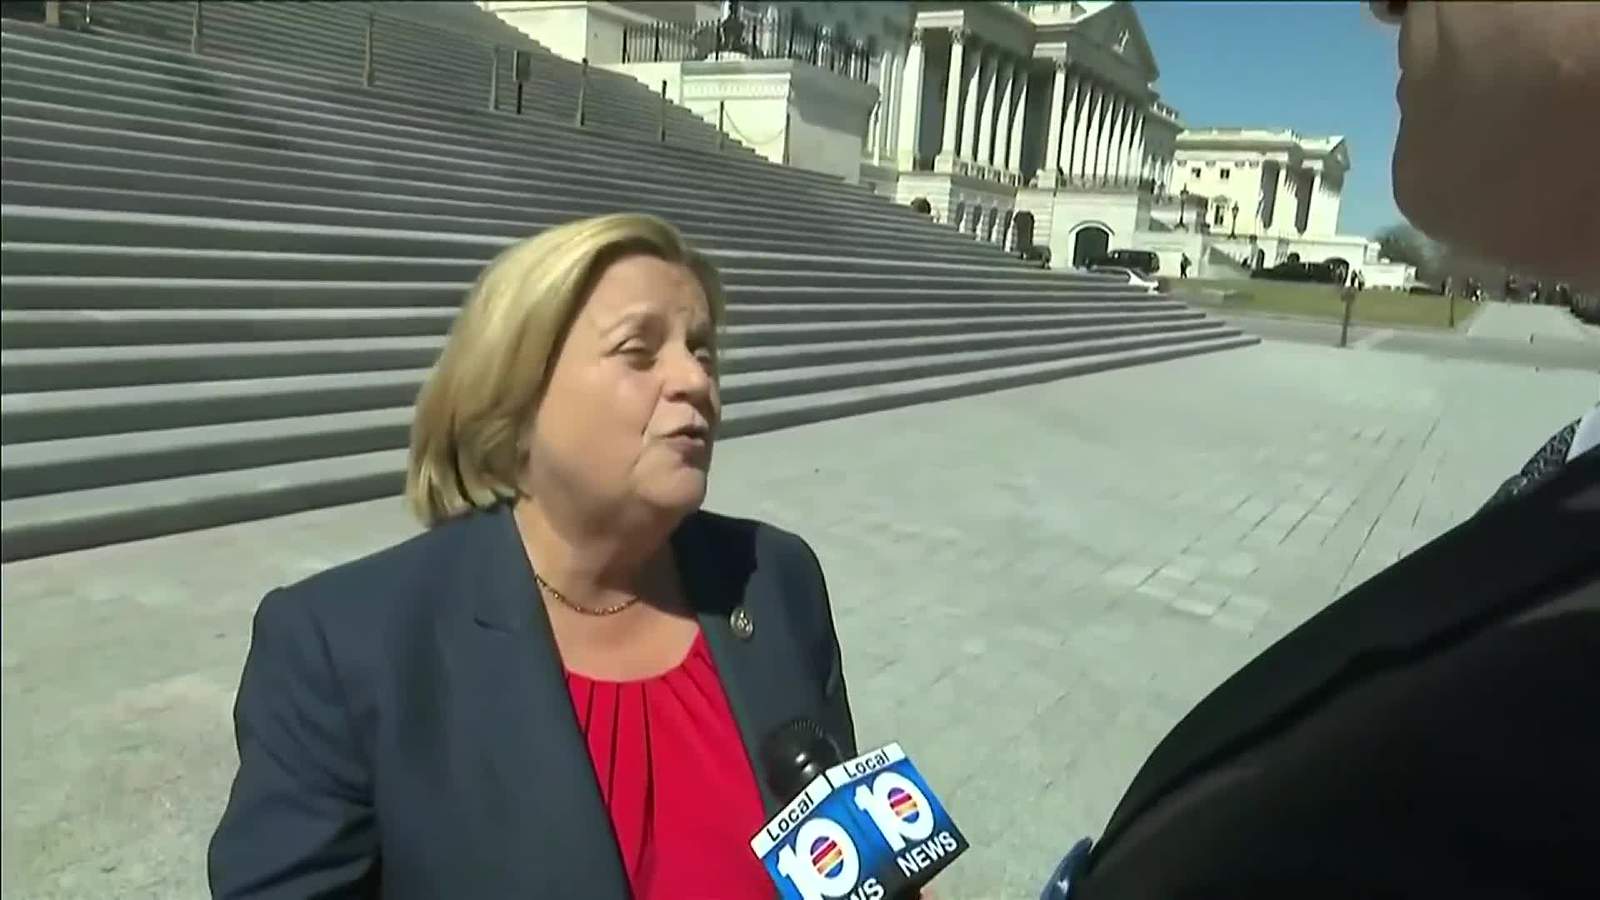 Former congresswoman from Miami may have misused campaign cash